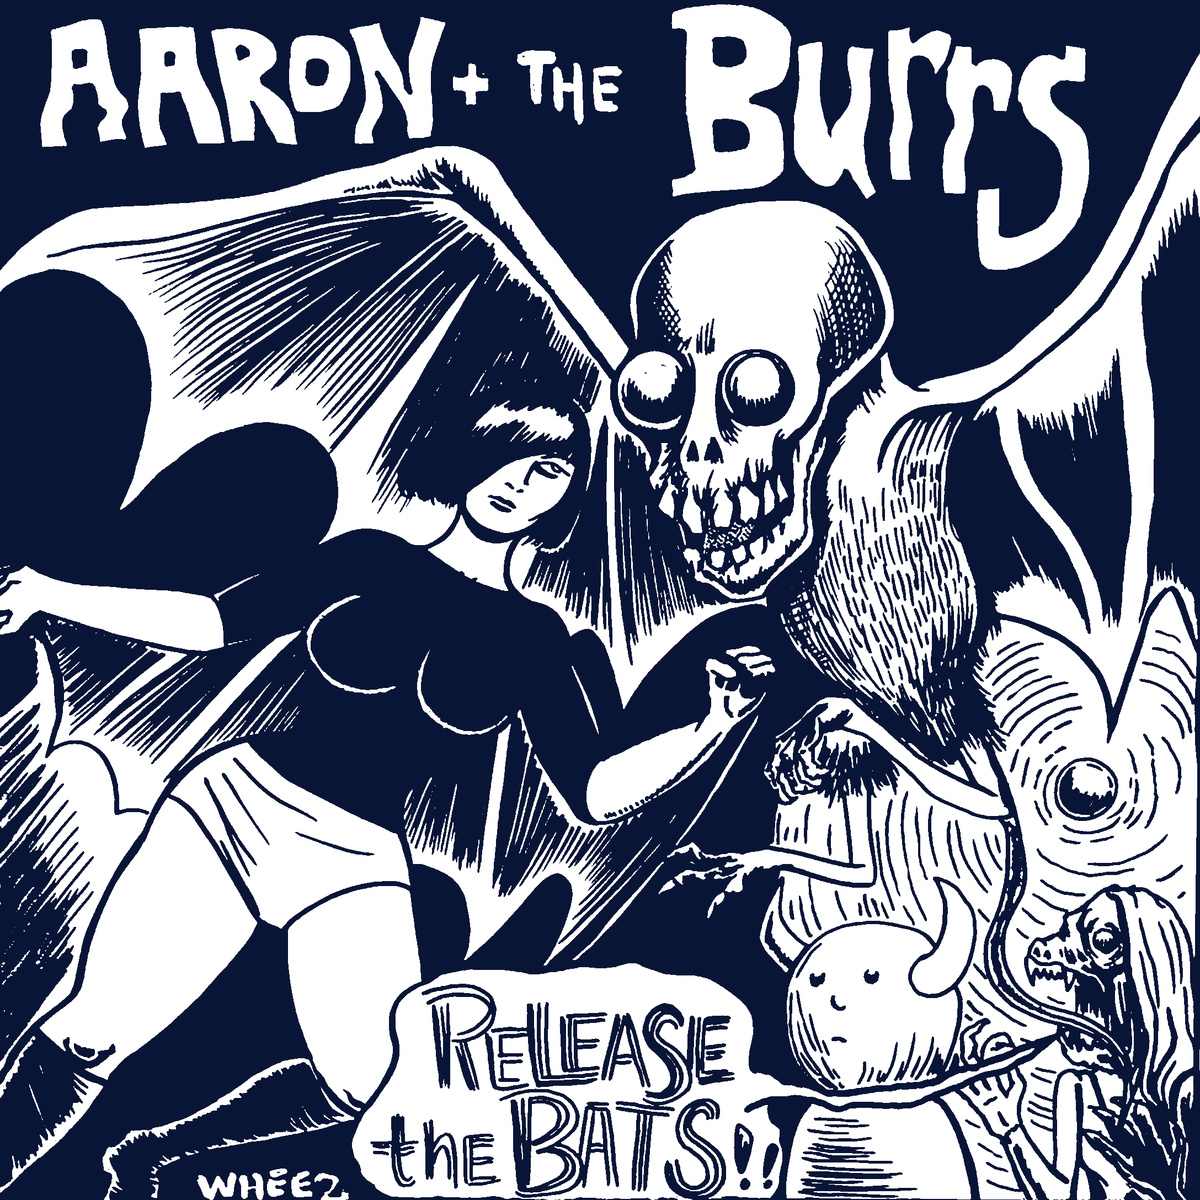 Aaron & the Burrs Drop New Single, “Release the Bats”